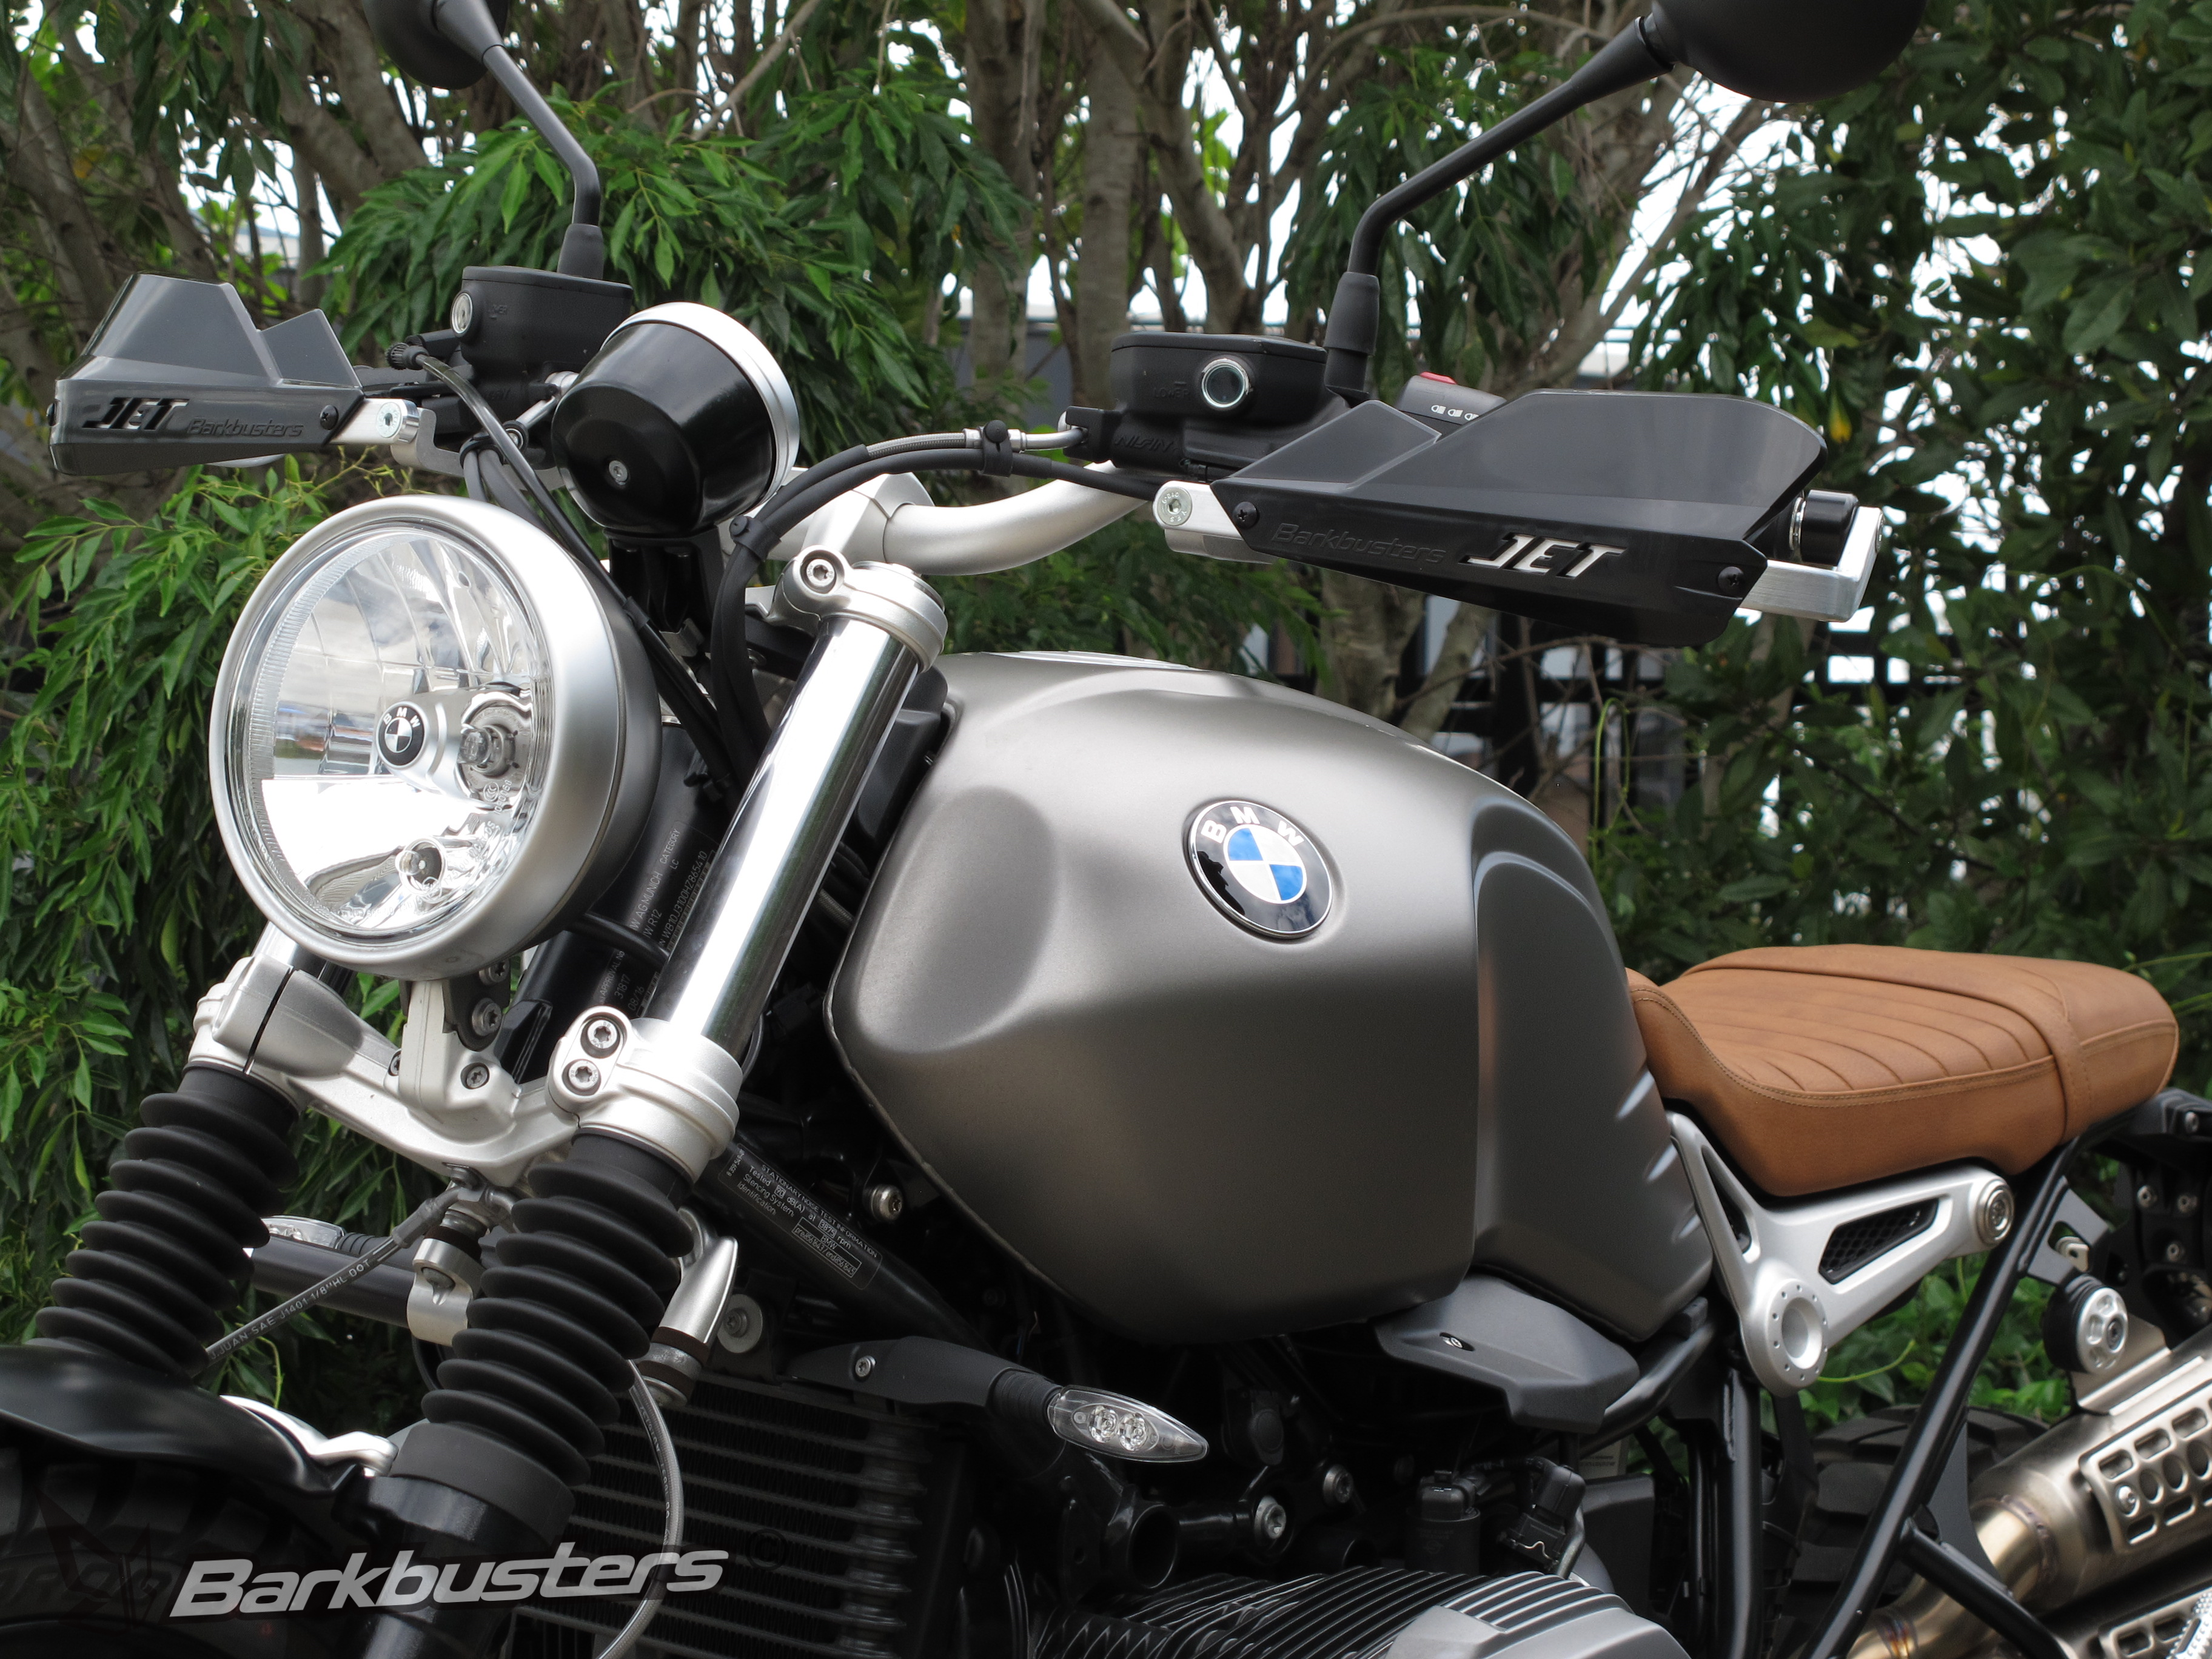 BARKBUSTERS Handguard Hardware Kit (Code: BHG-064) fitted to BMW R Nine T Scrambler with Black JET Guards (Code: JET-003-BK) sold separately